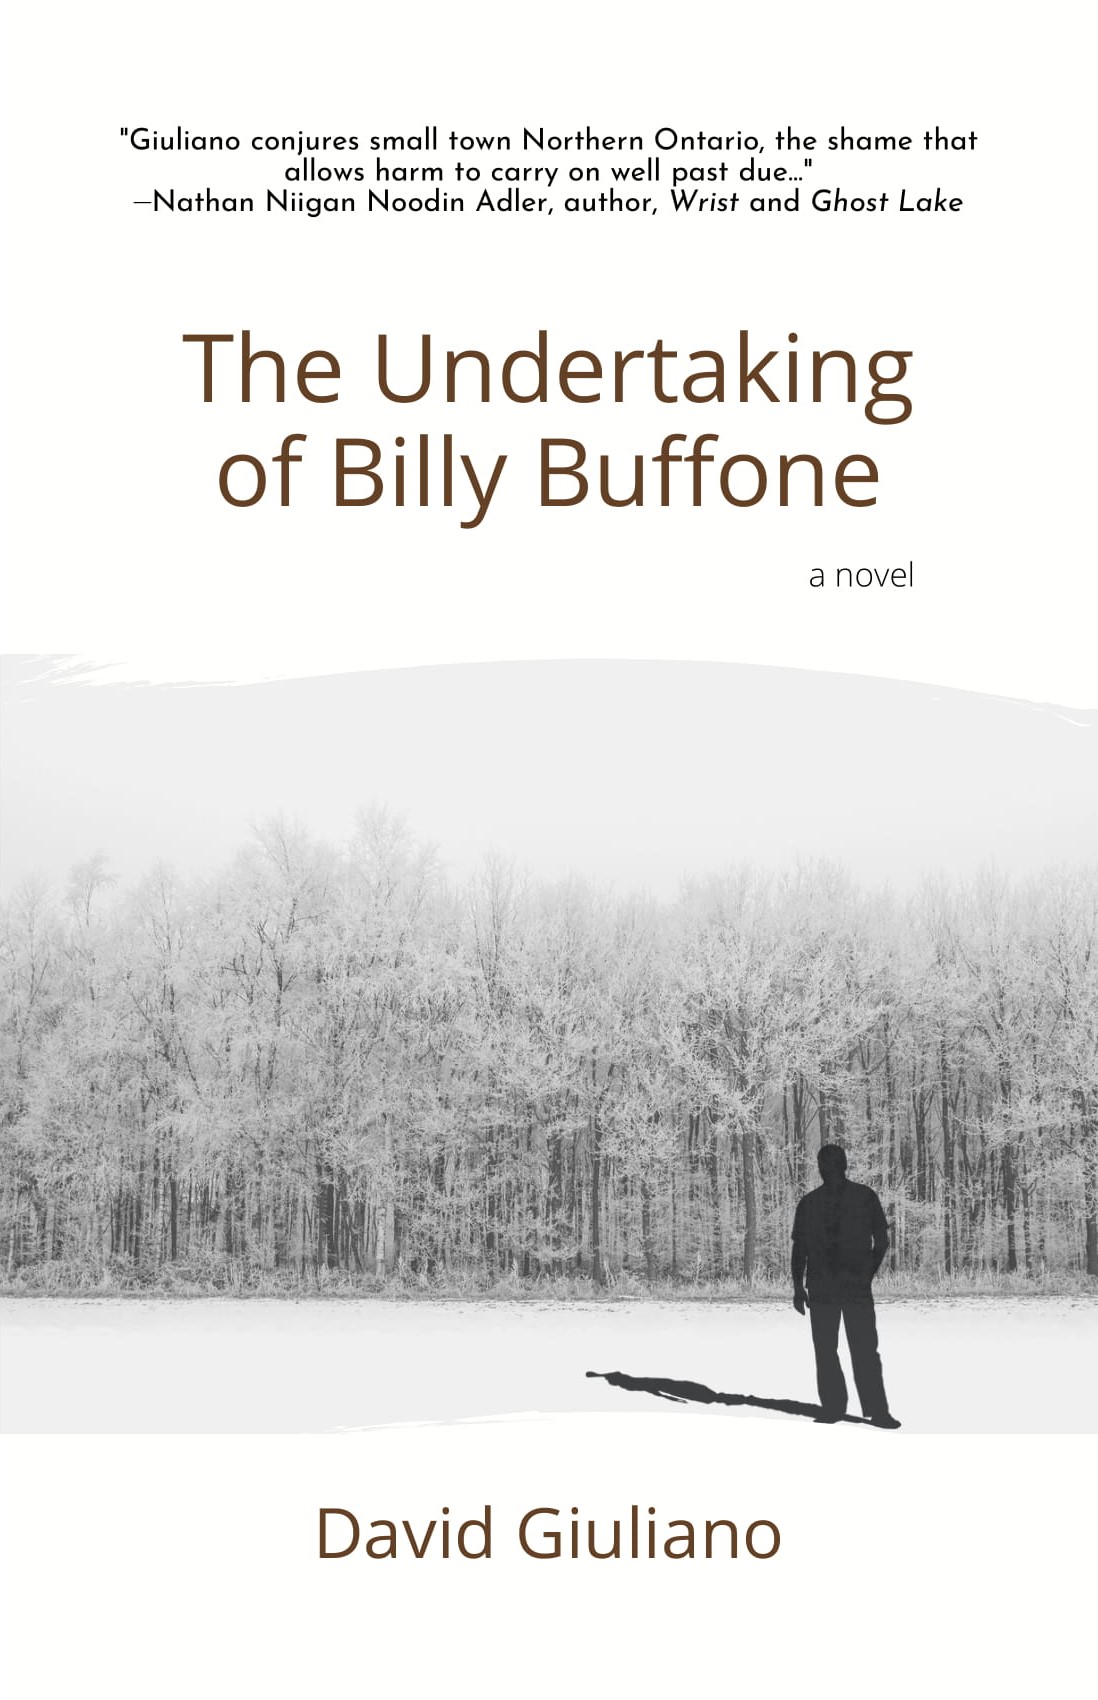 The Undertaking of Billy Buffone book cover